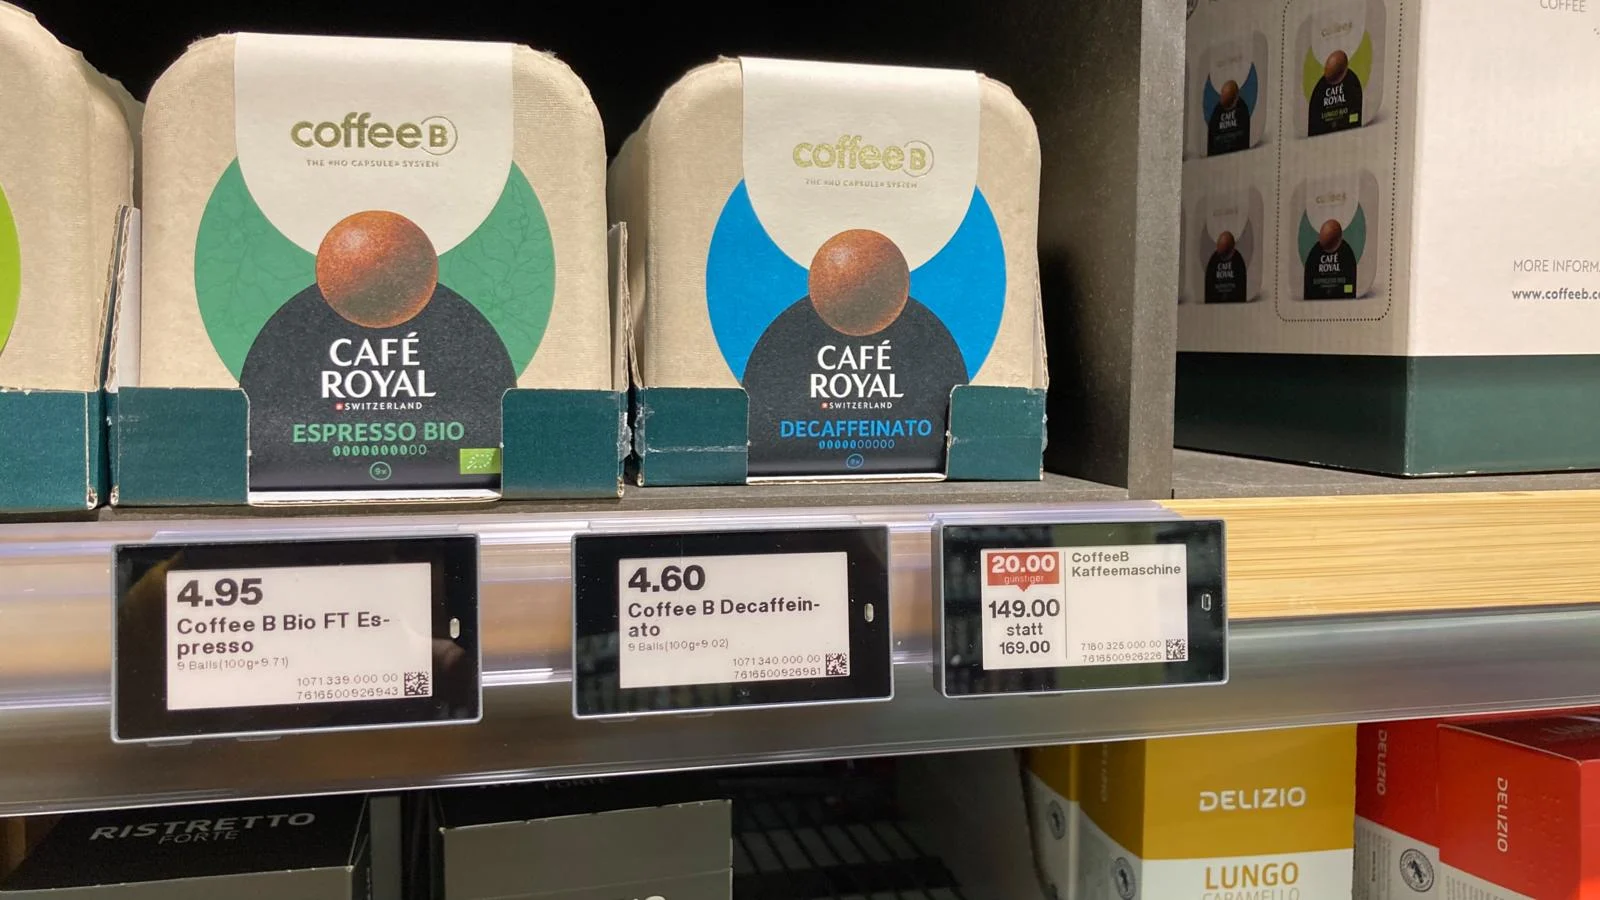 CoffeeB products on the shelves with electronic price tags